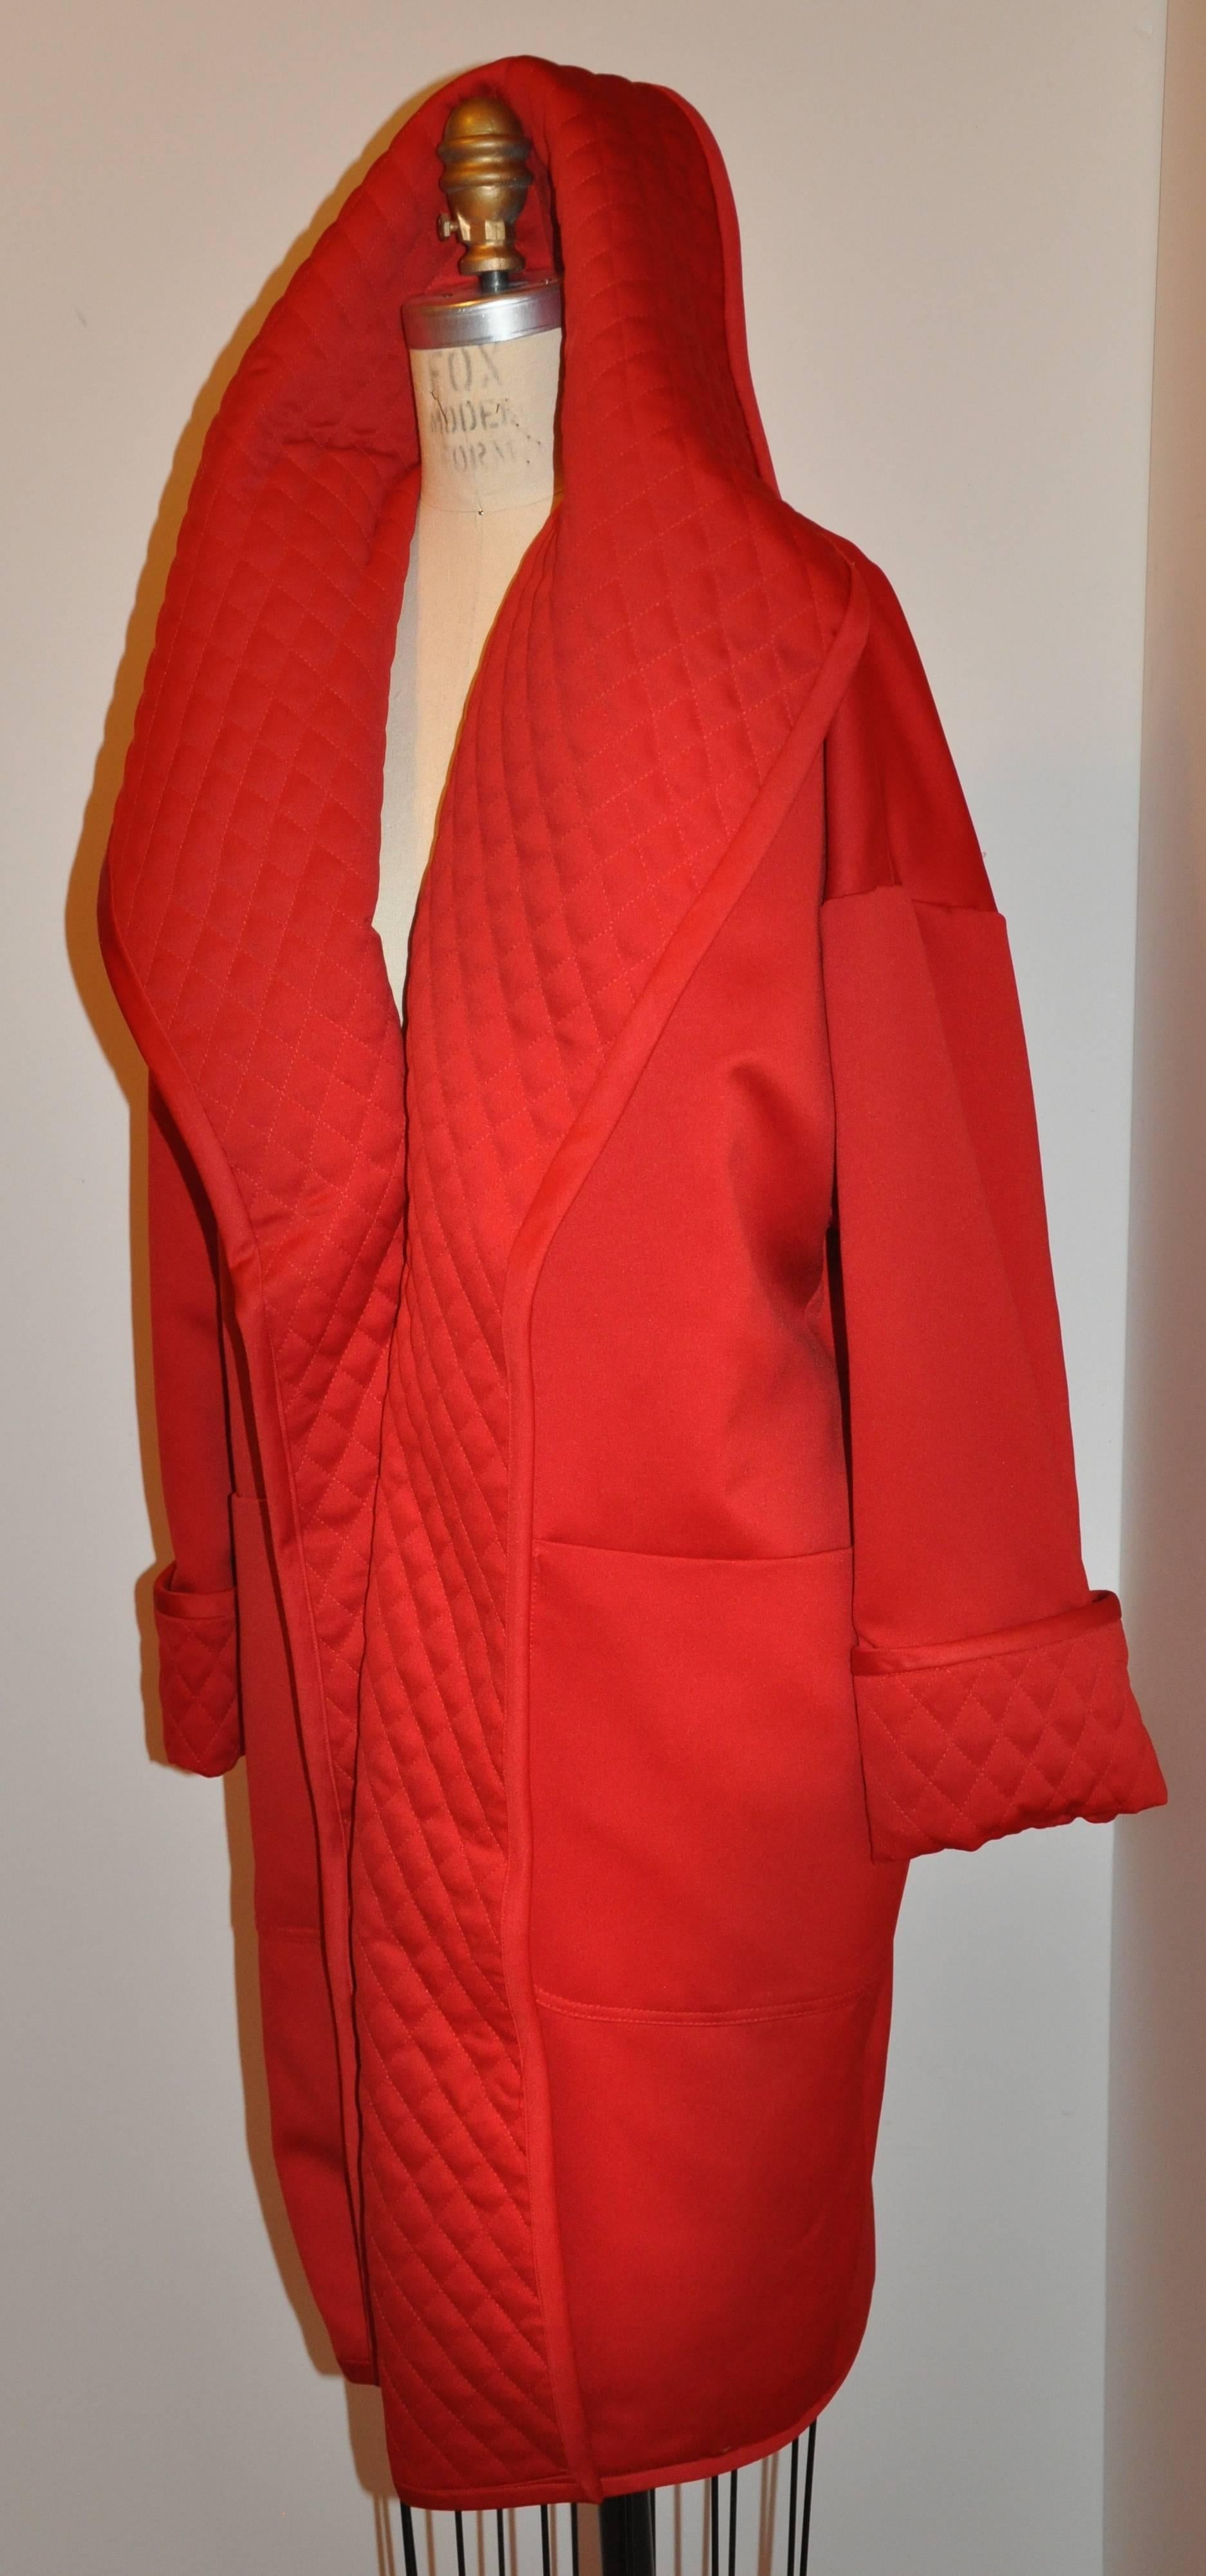           Victor Costa wicked bold engine-red silk evening overcoat is accented with an oversize shawl collar with quilted-like stitching. All edges are finished with same material piping accent. The front has two huge patch pockets detailing this